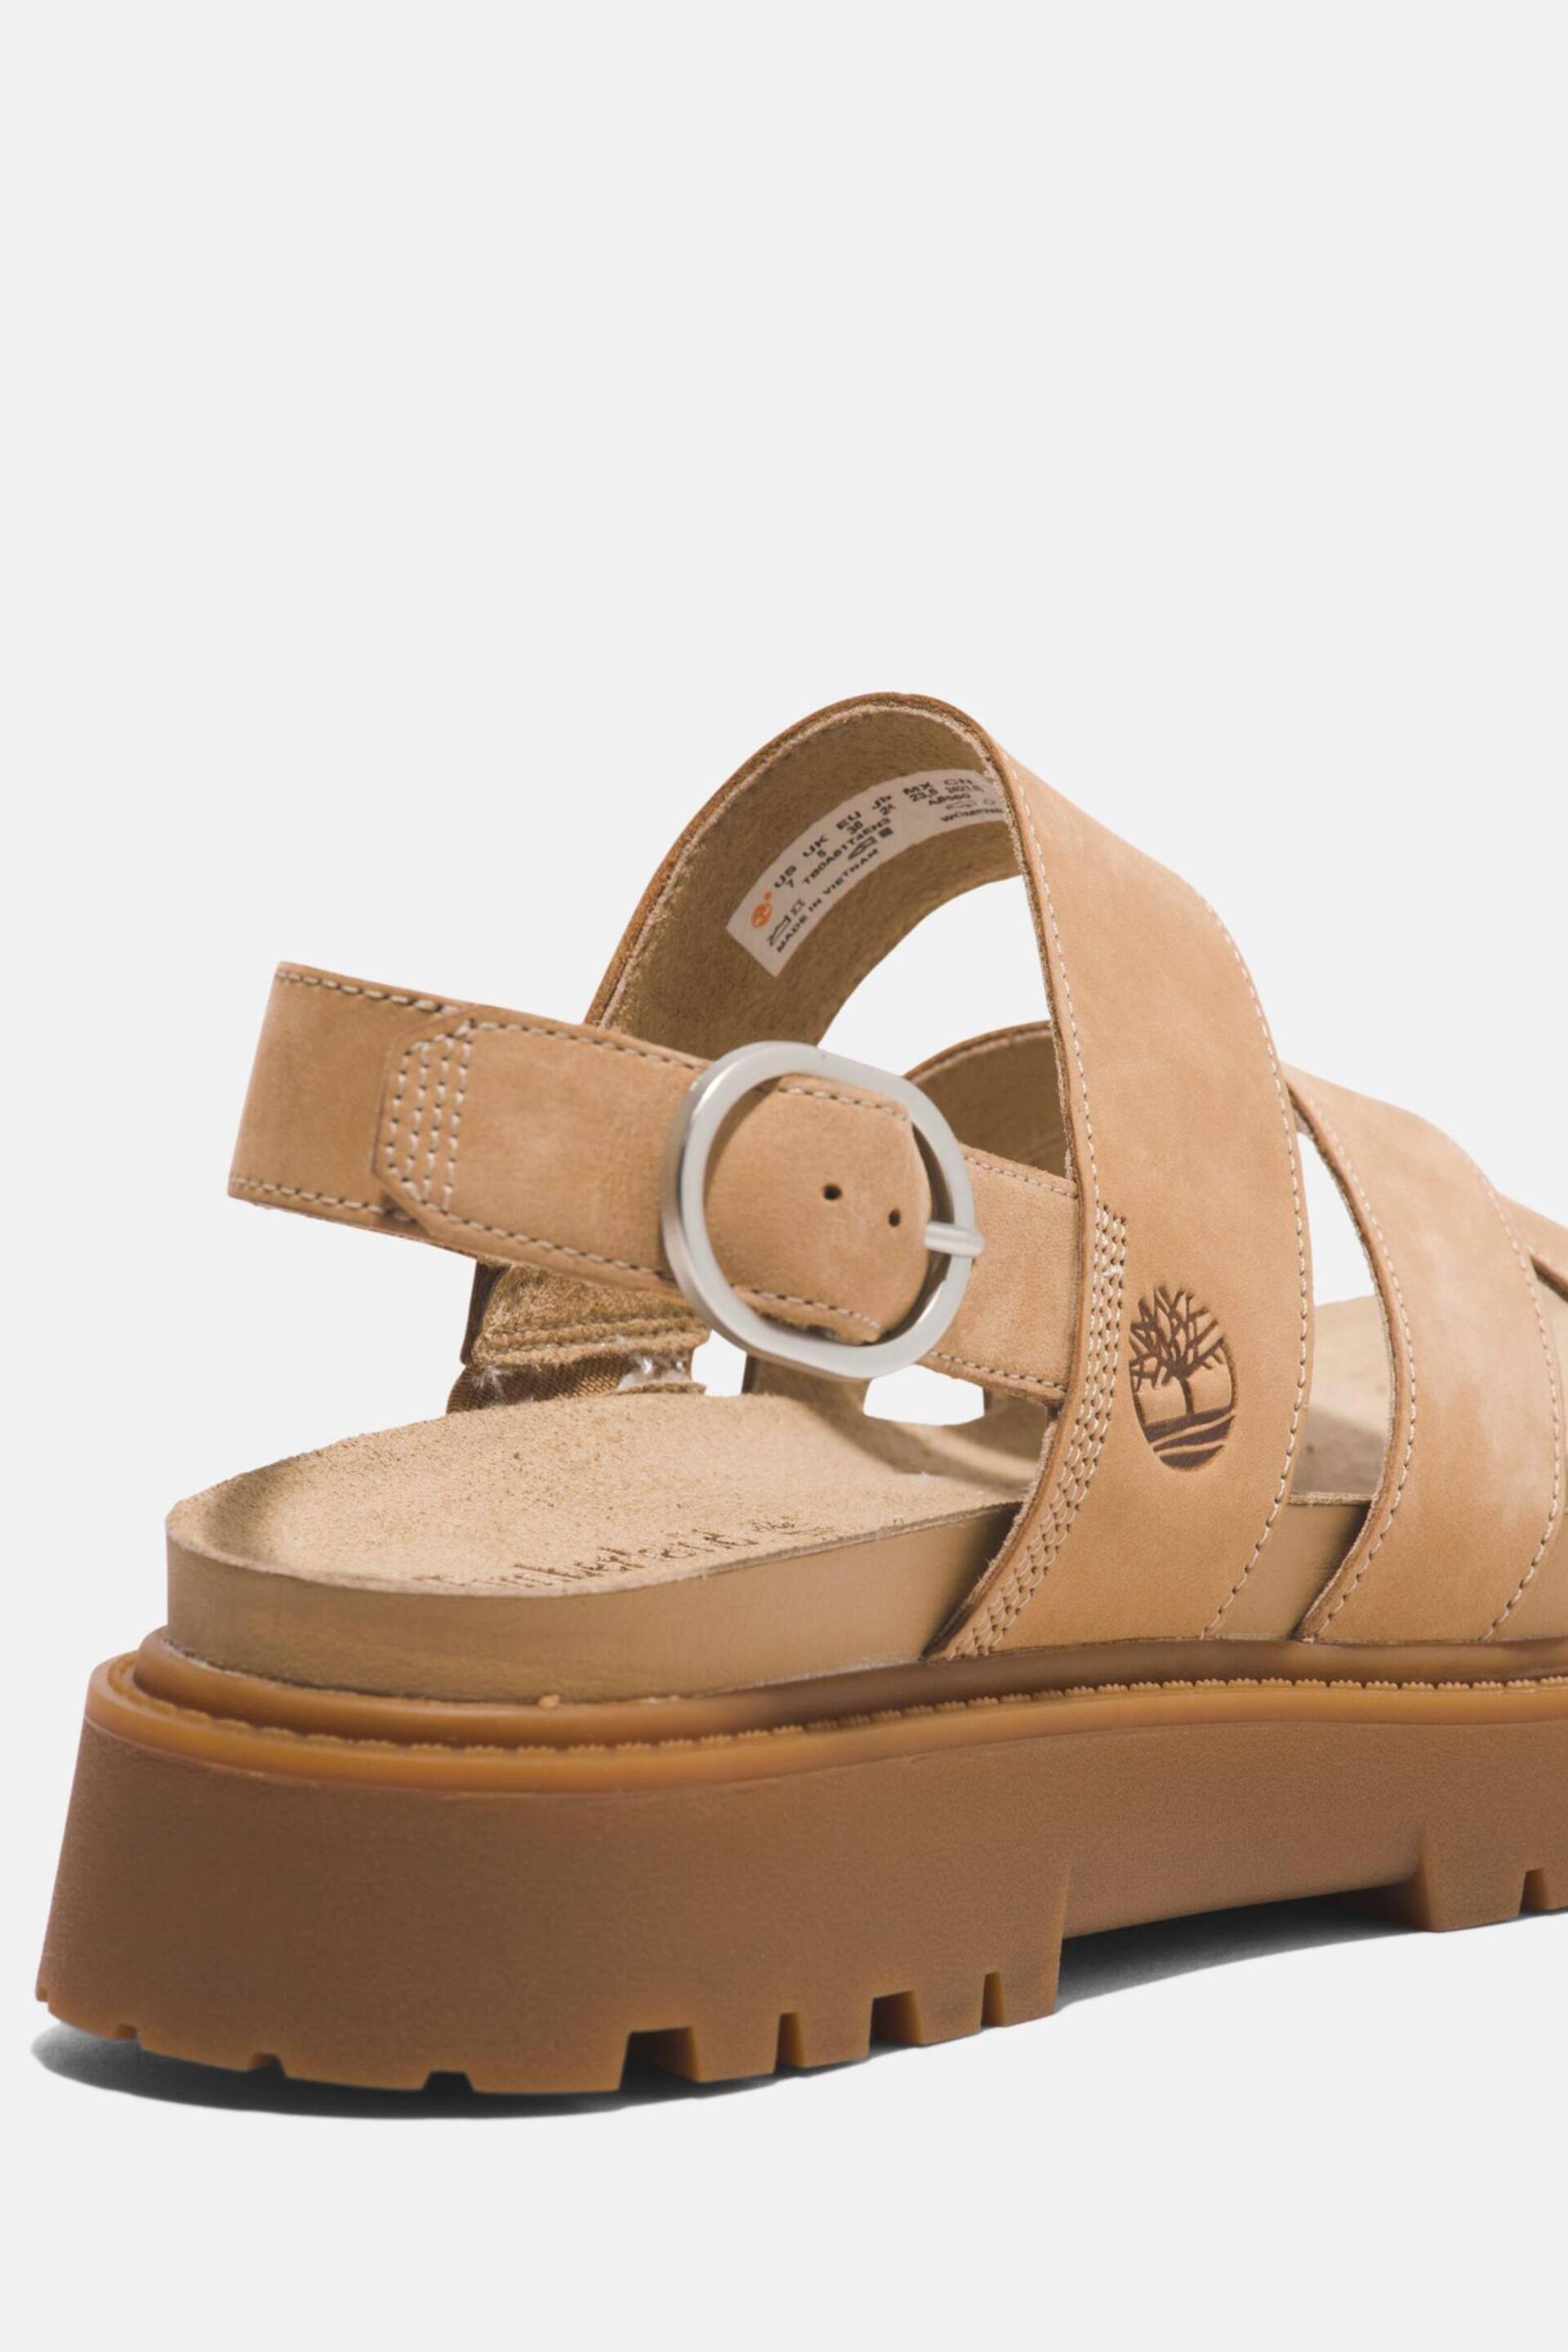 Timberland Cream Clairemont Way Cross Strap Sandals - Image 4 of 7